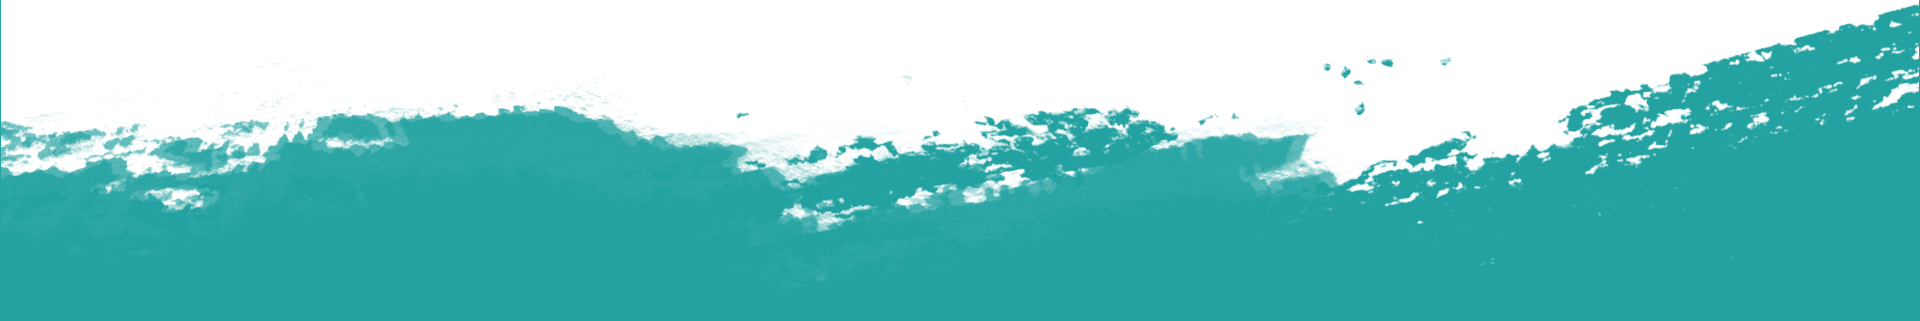 A green and blue map of the ocean.